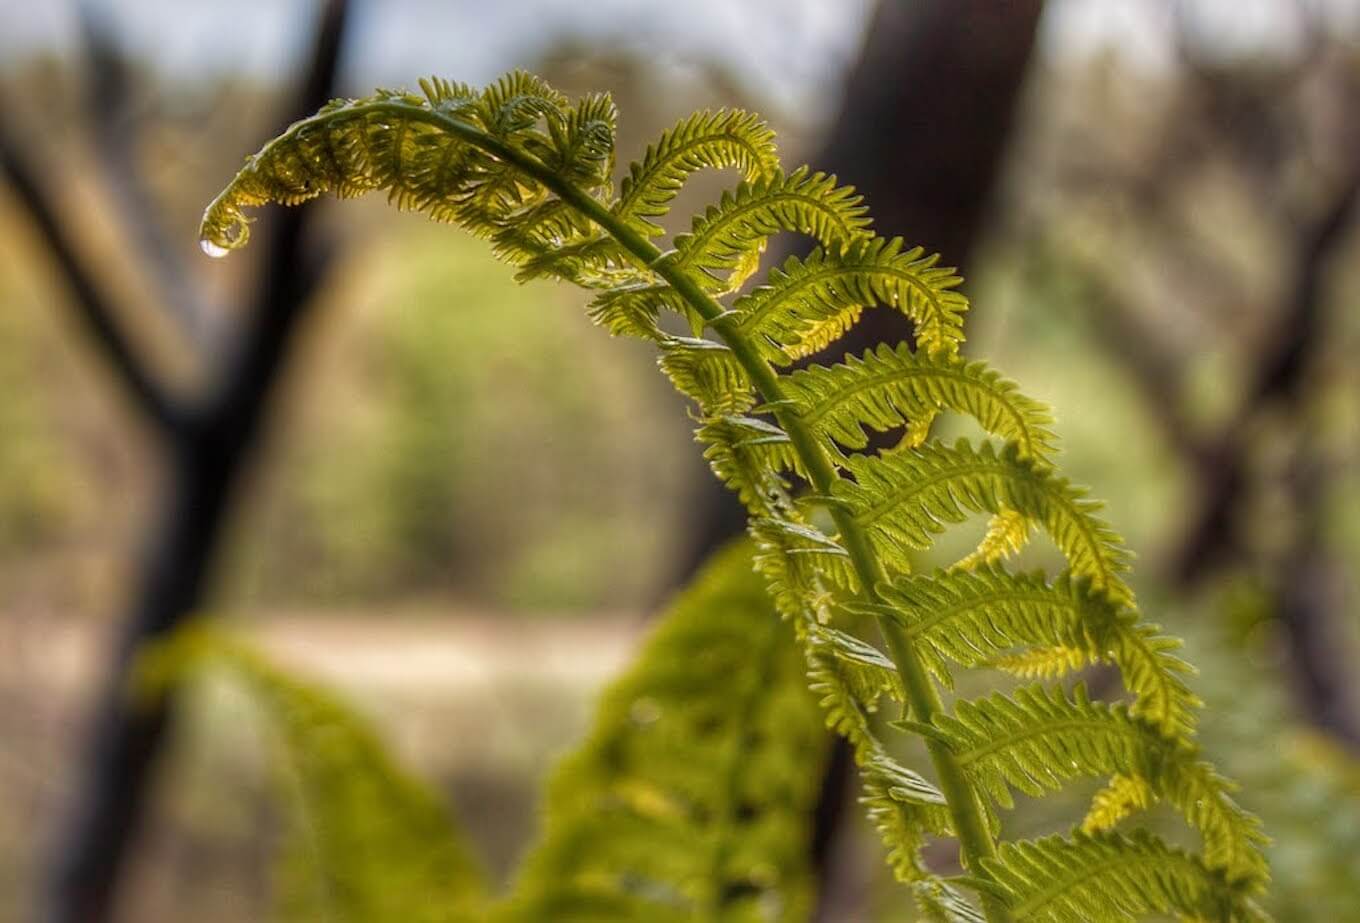 Nature photography can include details in nature such as this fern.
